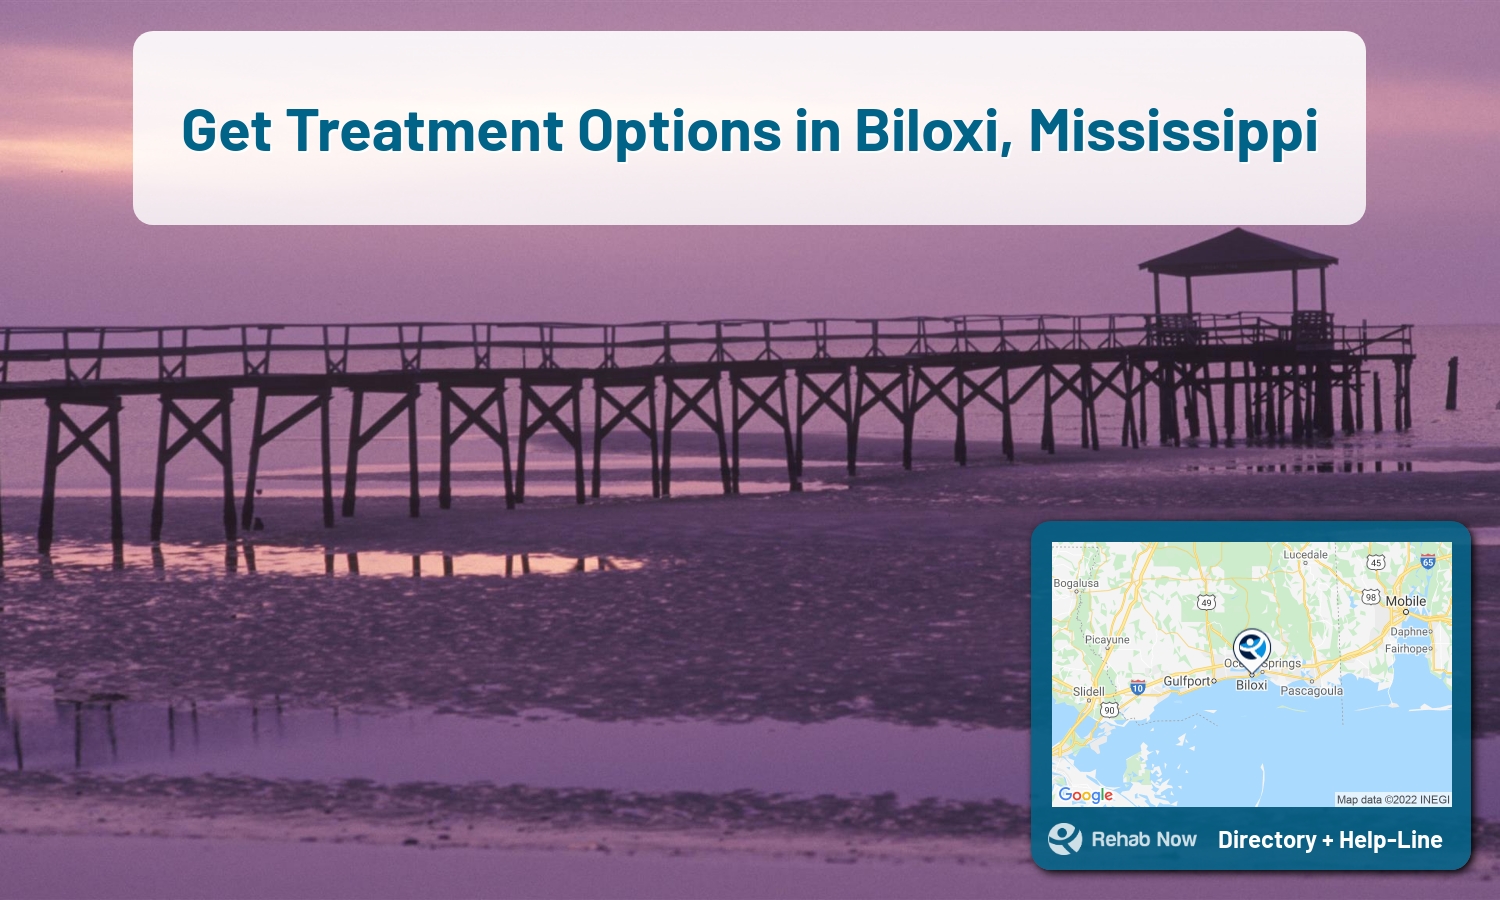 Let our expert counselors help find the best addiction treatment in Biloxi, Mississippi now with a free call to our hotline.